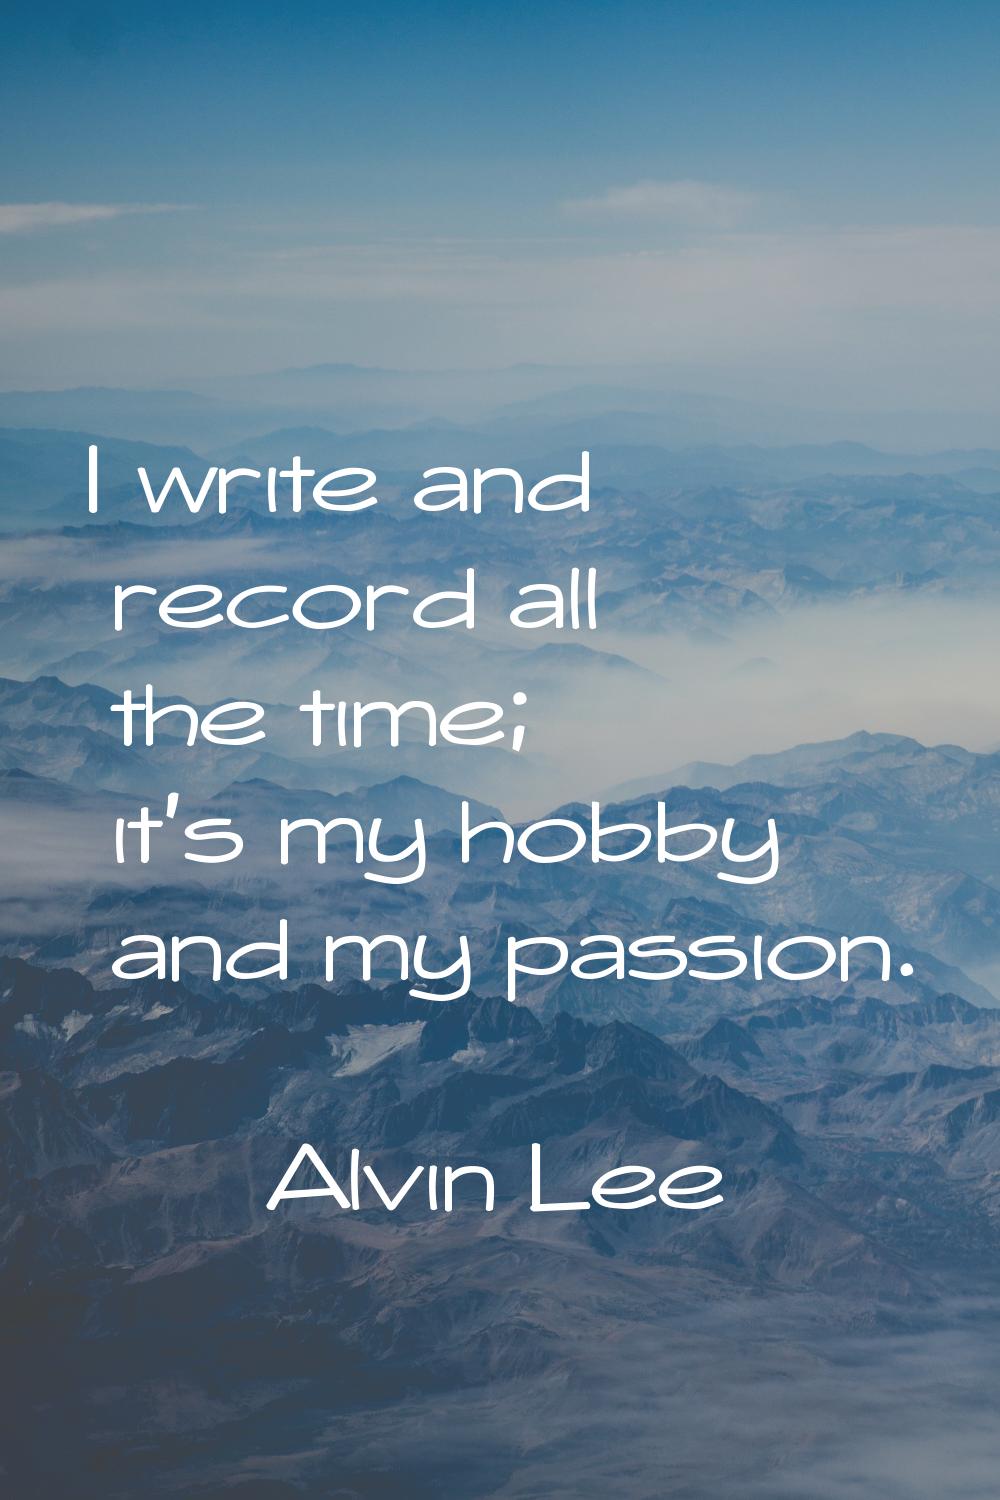 I write and record all the time; it's my hobby and my passion.